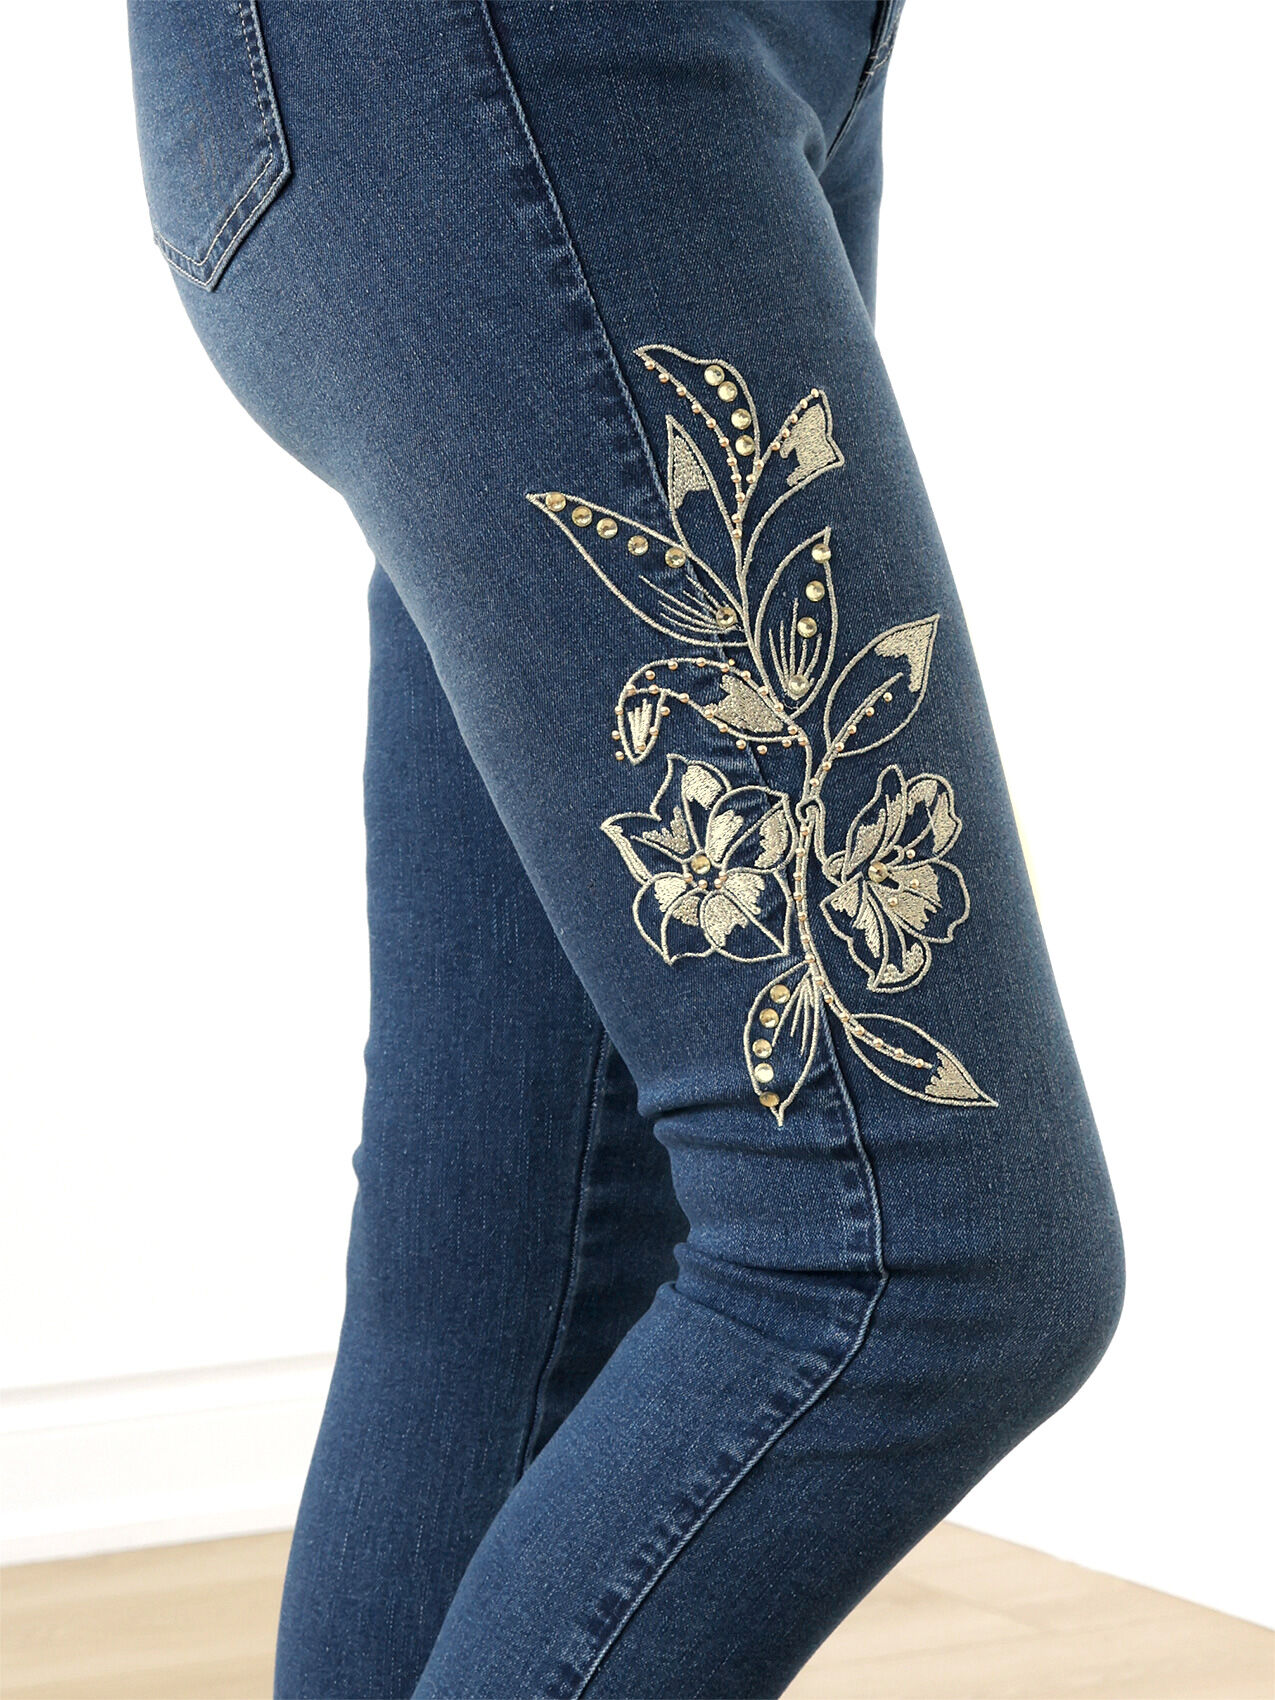 Embroidered Slim Ankle Jeans by GG